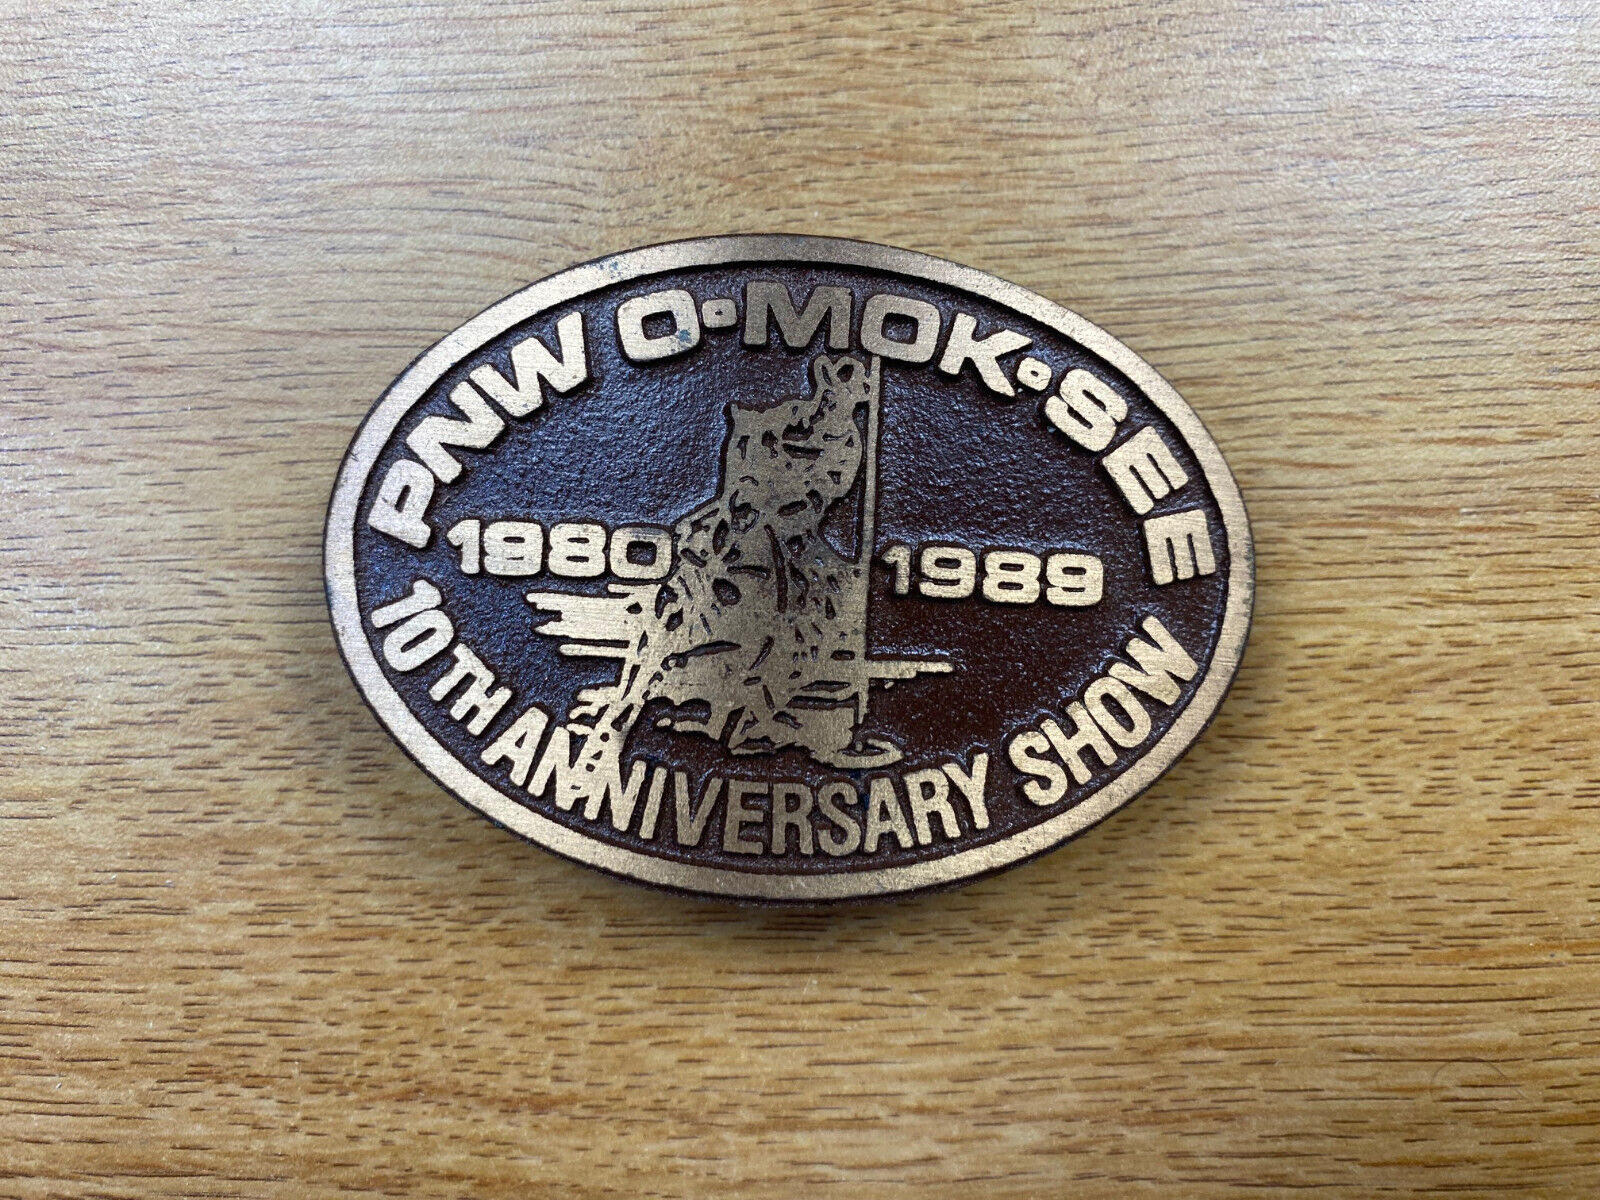 Vintage Belt Buckle 1989 O-MOK-SEE 10th Anniversary Show Horse Dance PNW